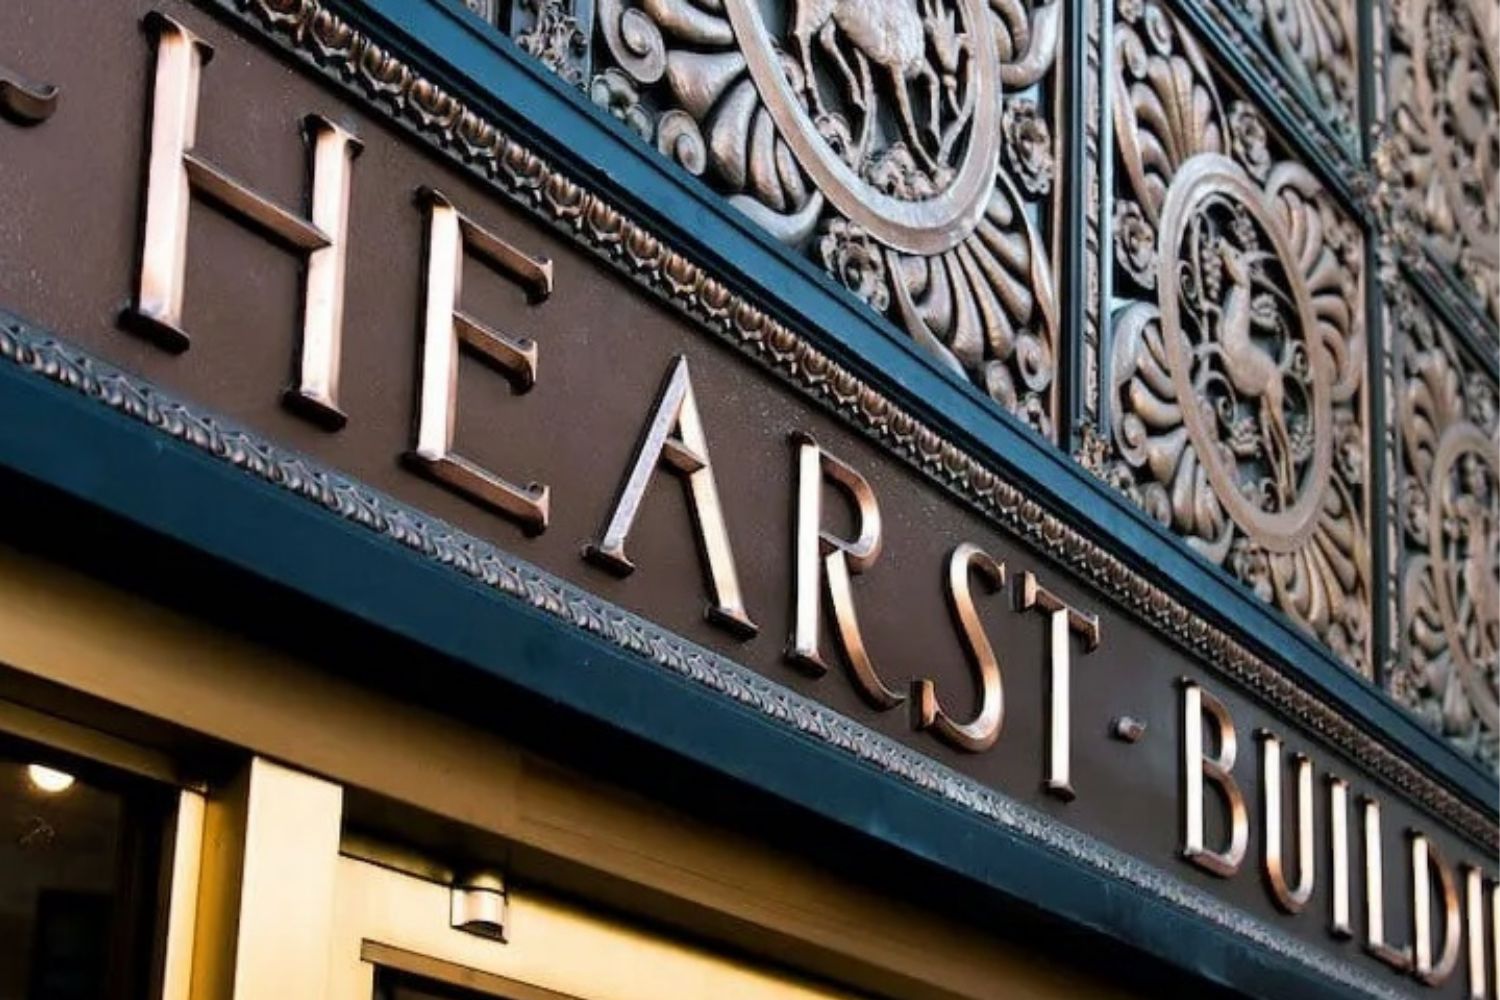 The Hearst Hotel, Auberge Resorts Collection is set to debut in 2025